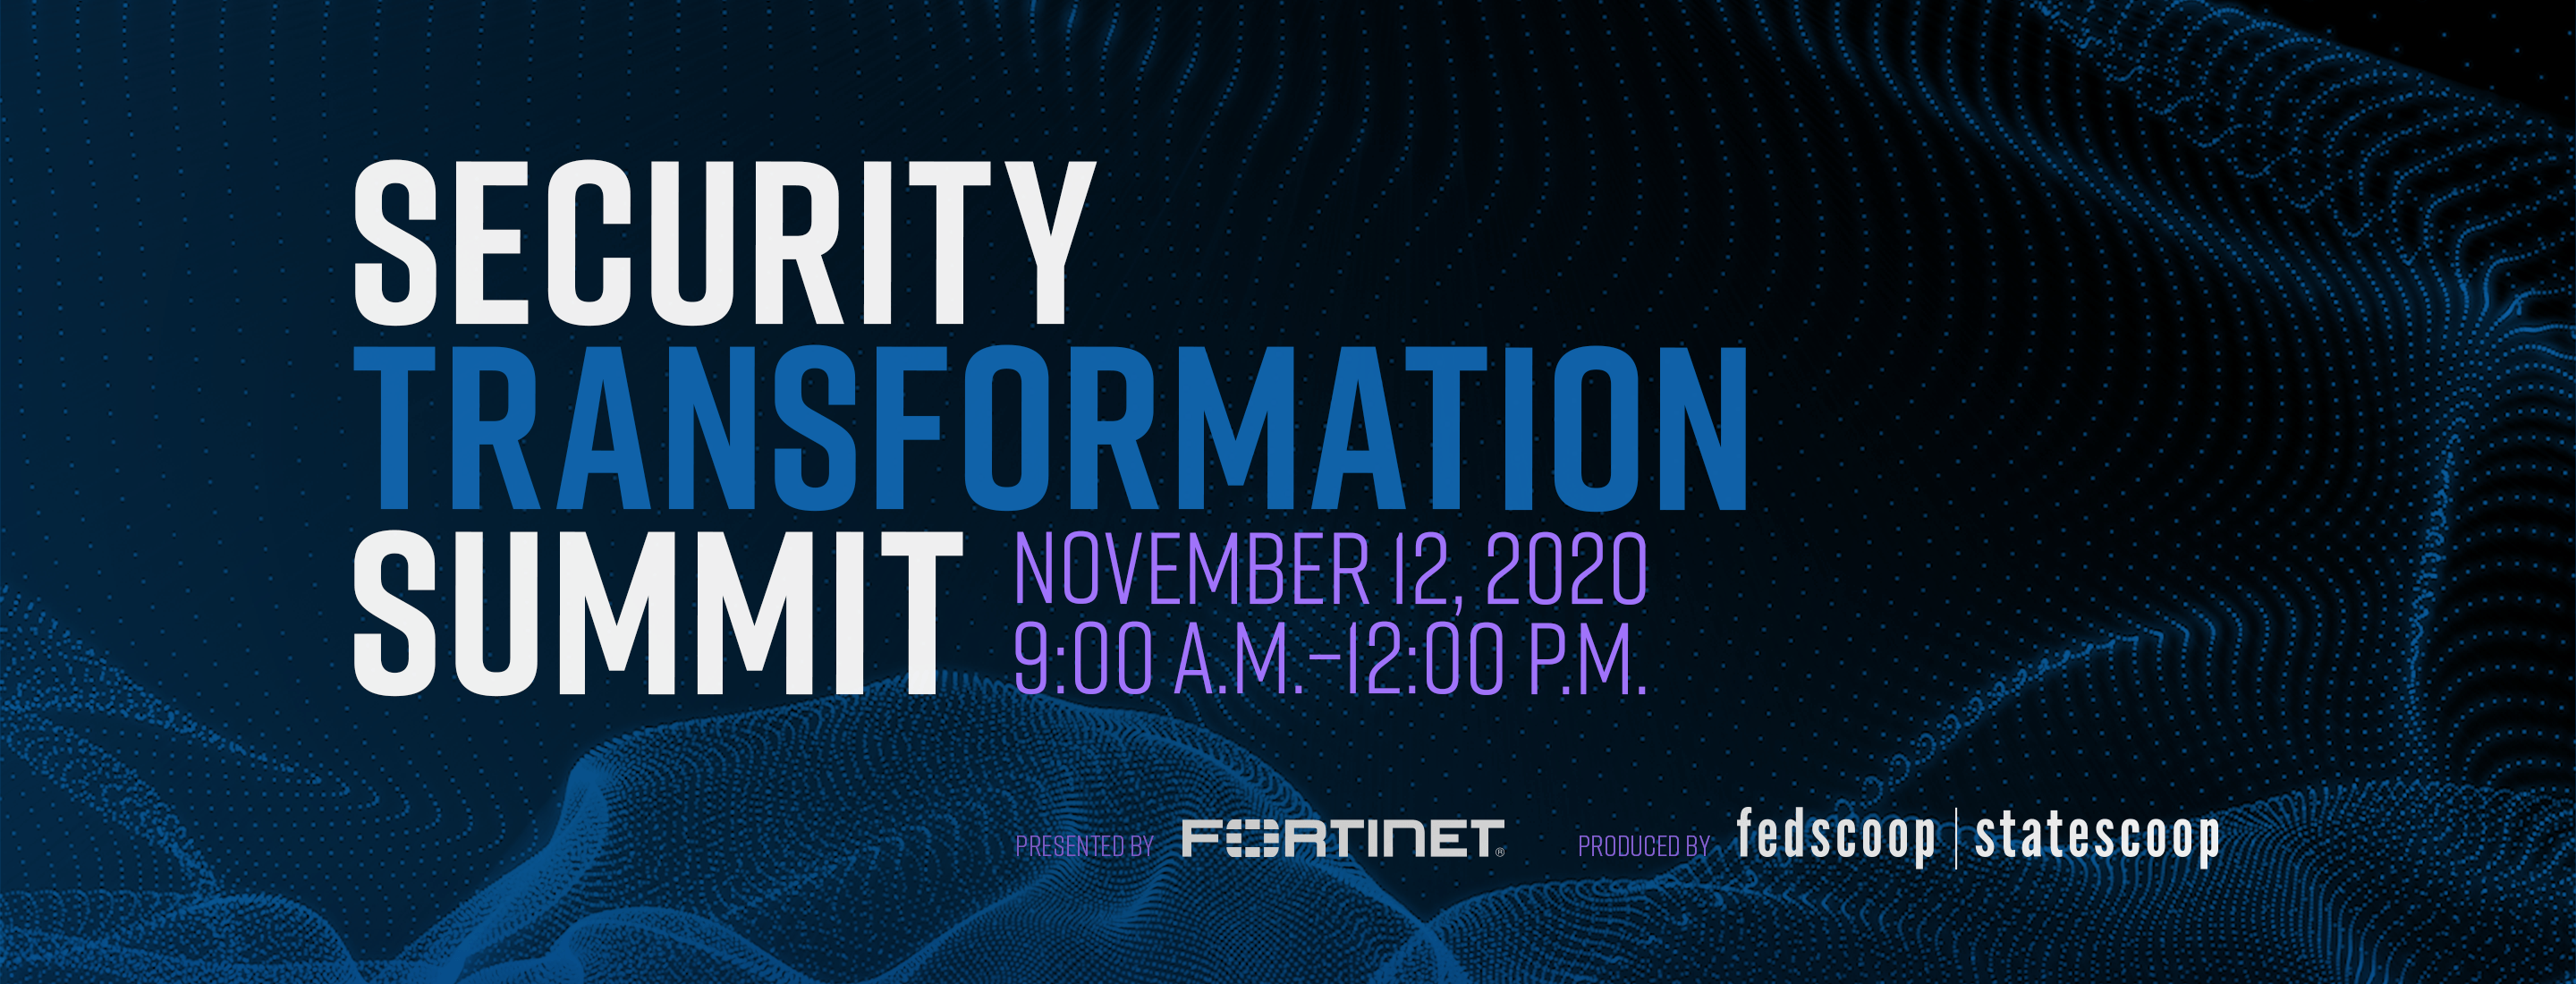 2020 Security Transformation Summit 11.12.20 produced by FedScoop | StateScoop